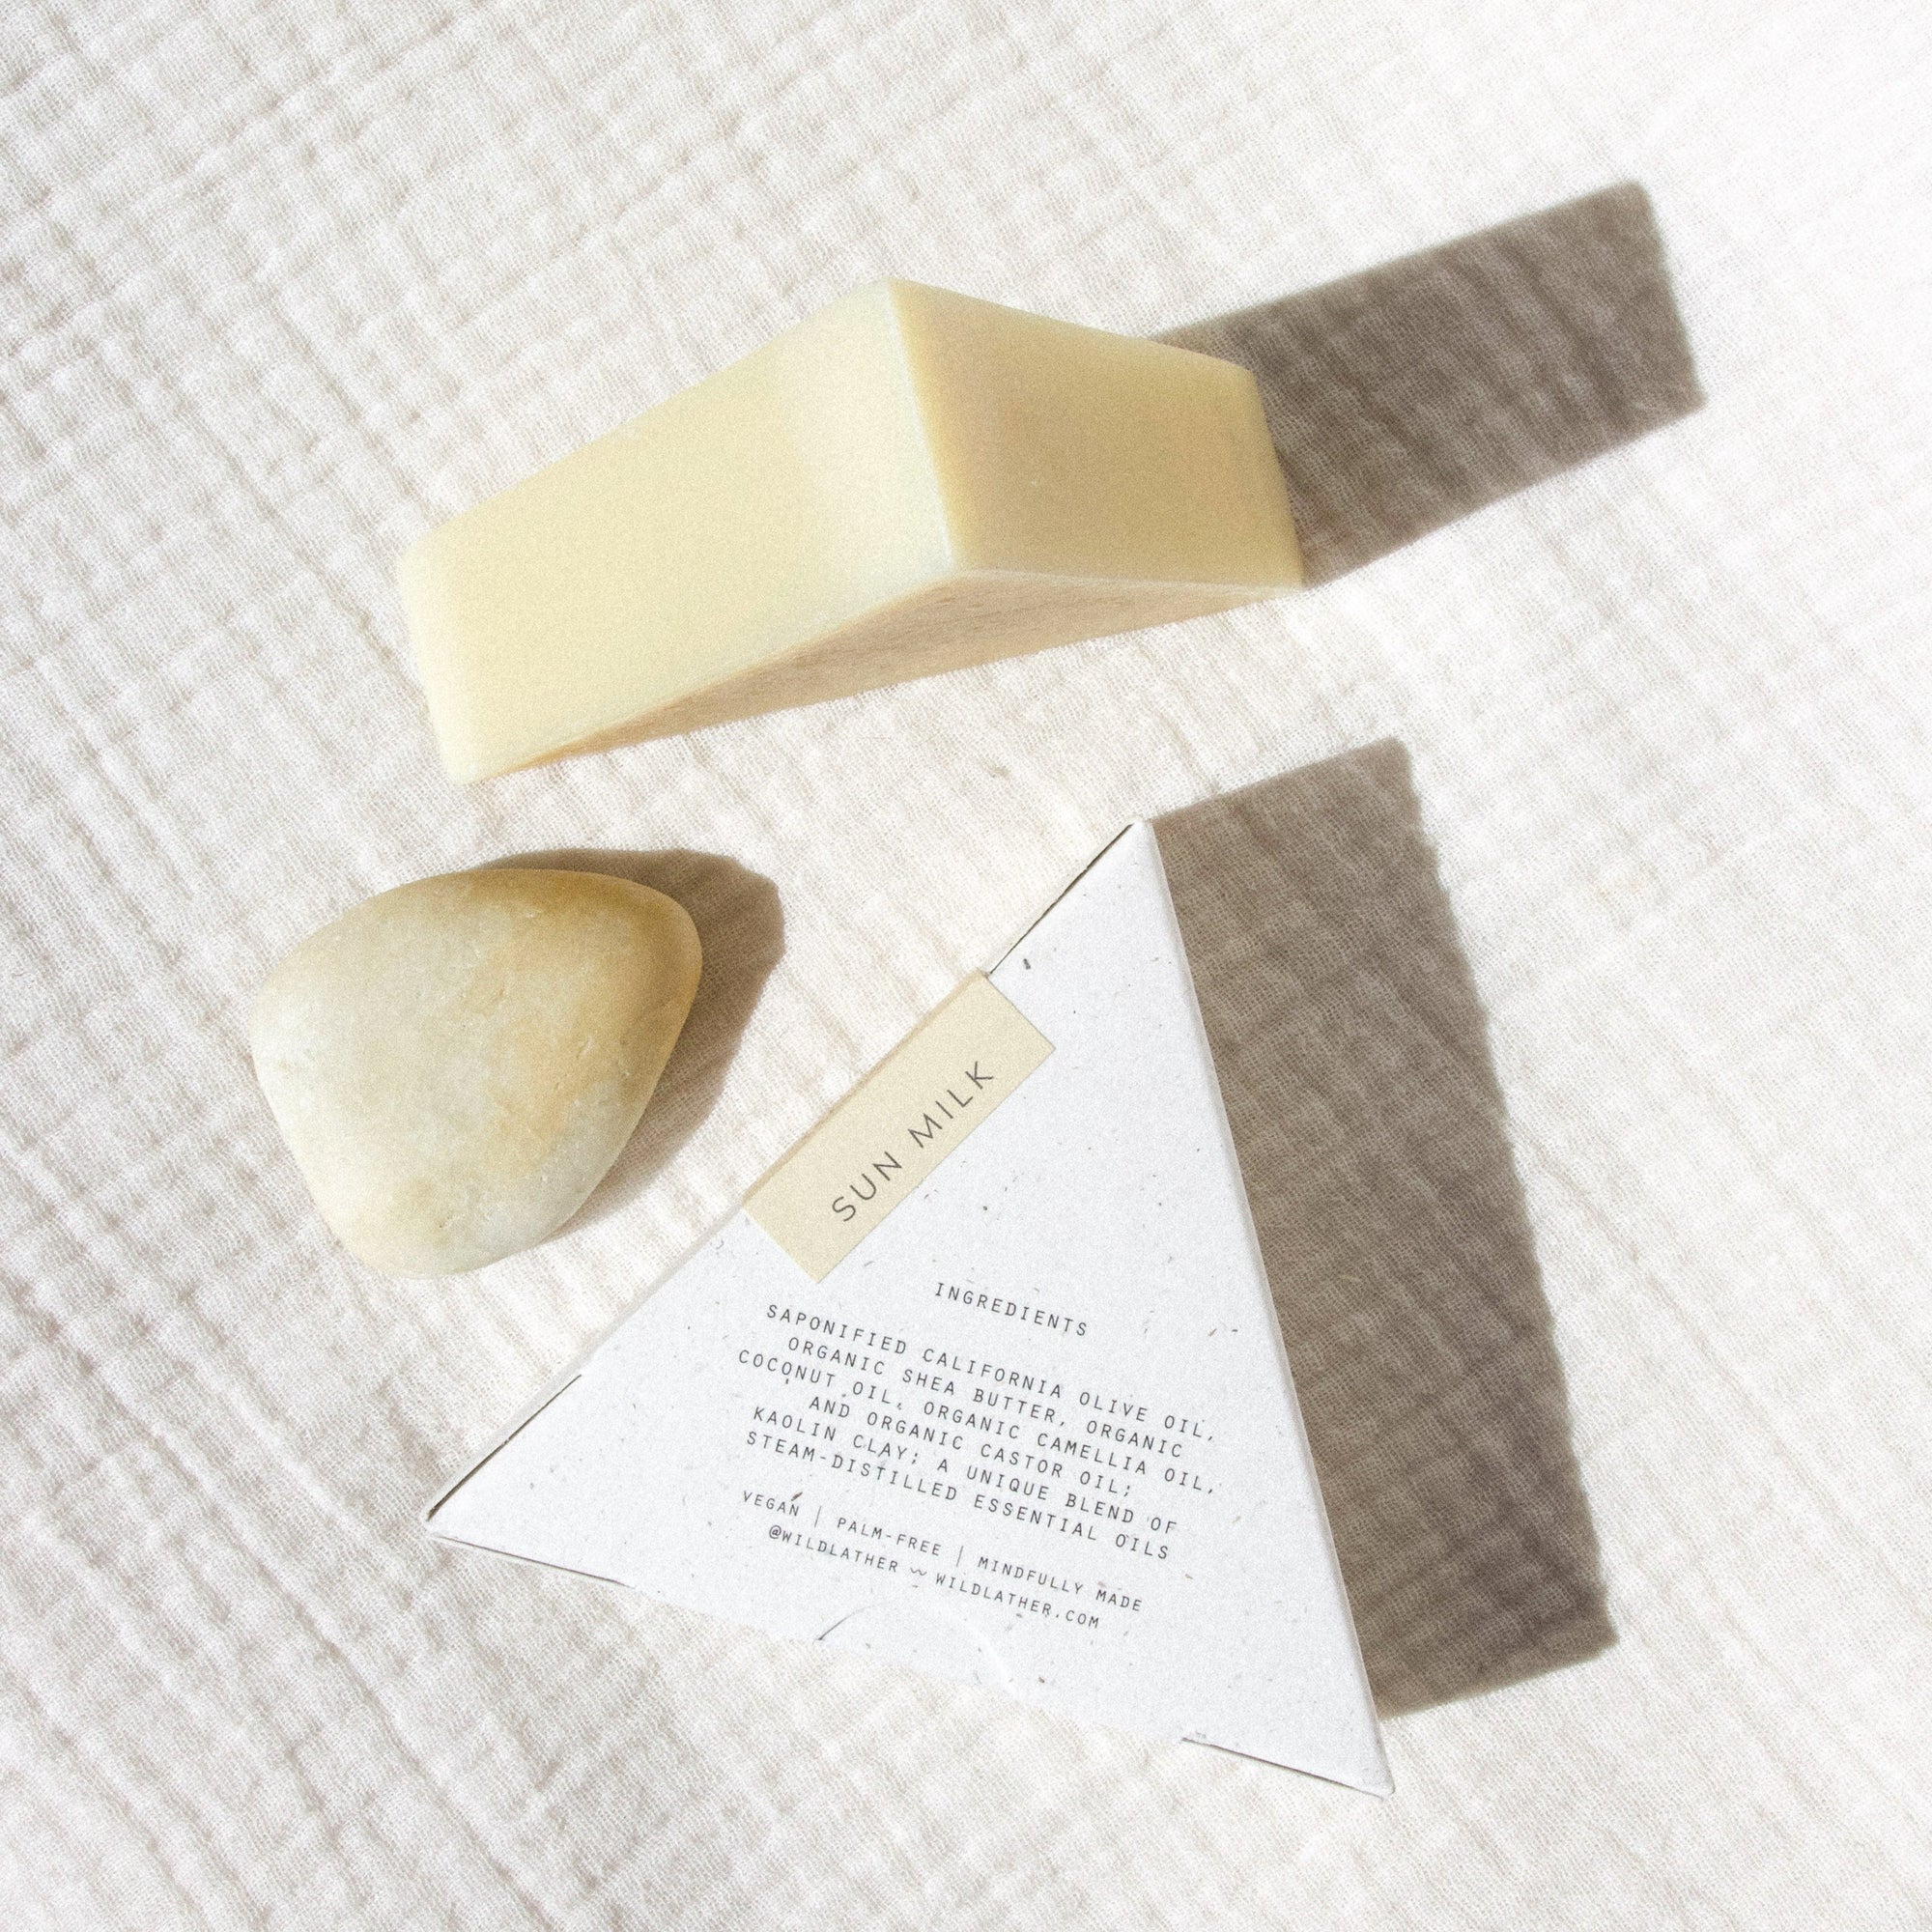 Two triangle soaps and a stone against a cream textured cloth